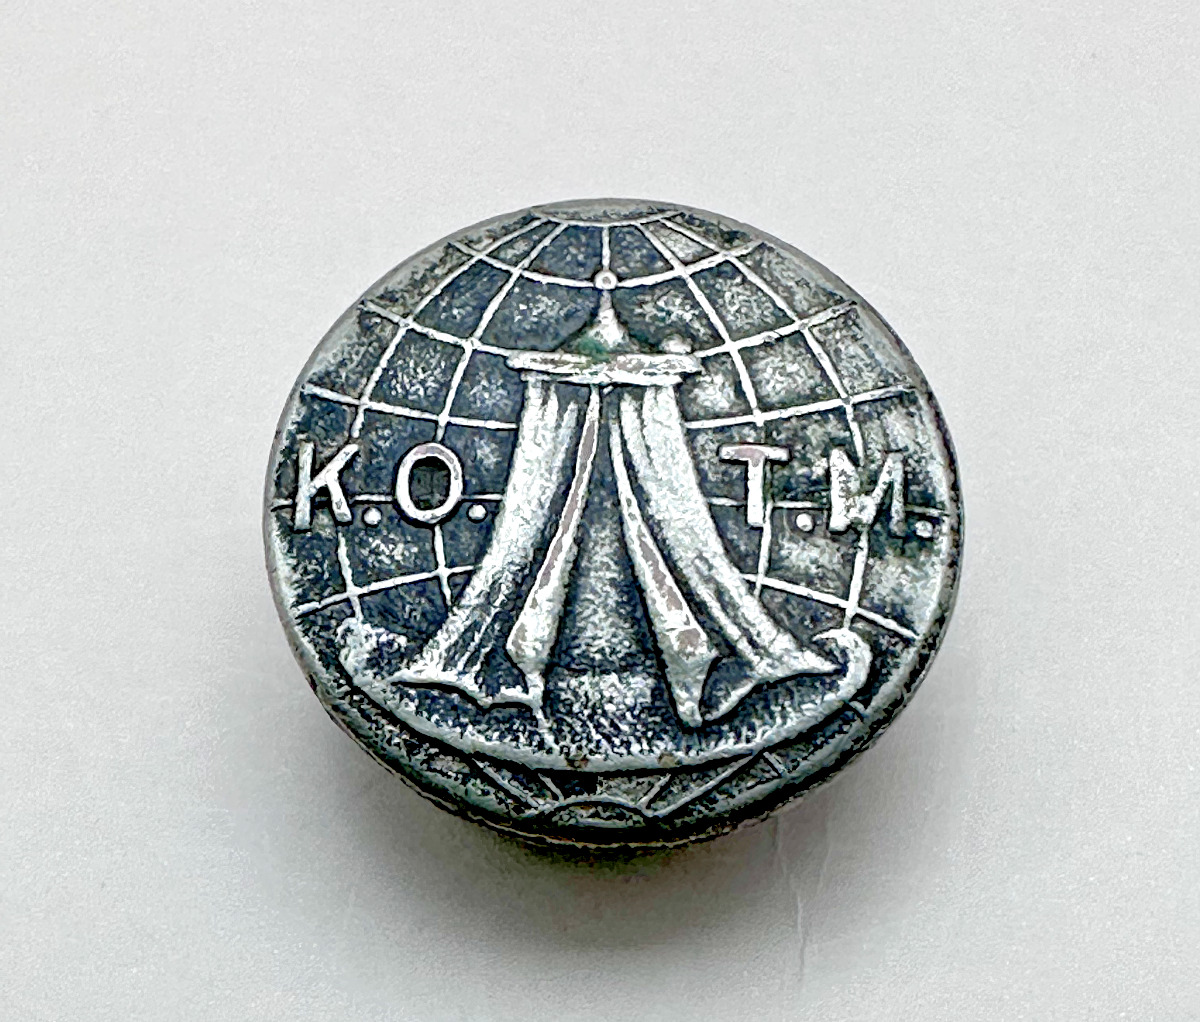 VINTAGE K.O.T.M. KNIGHTS OF MACCABEES LAPEL BUTTON A789